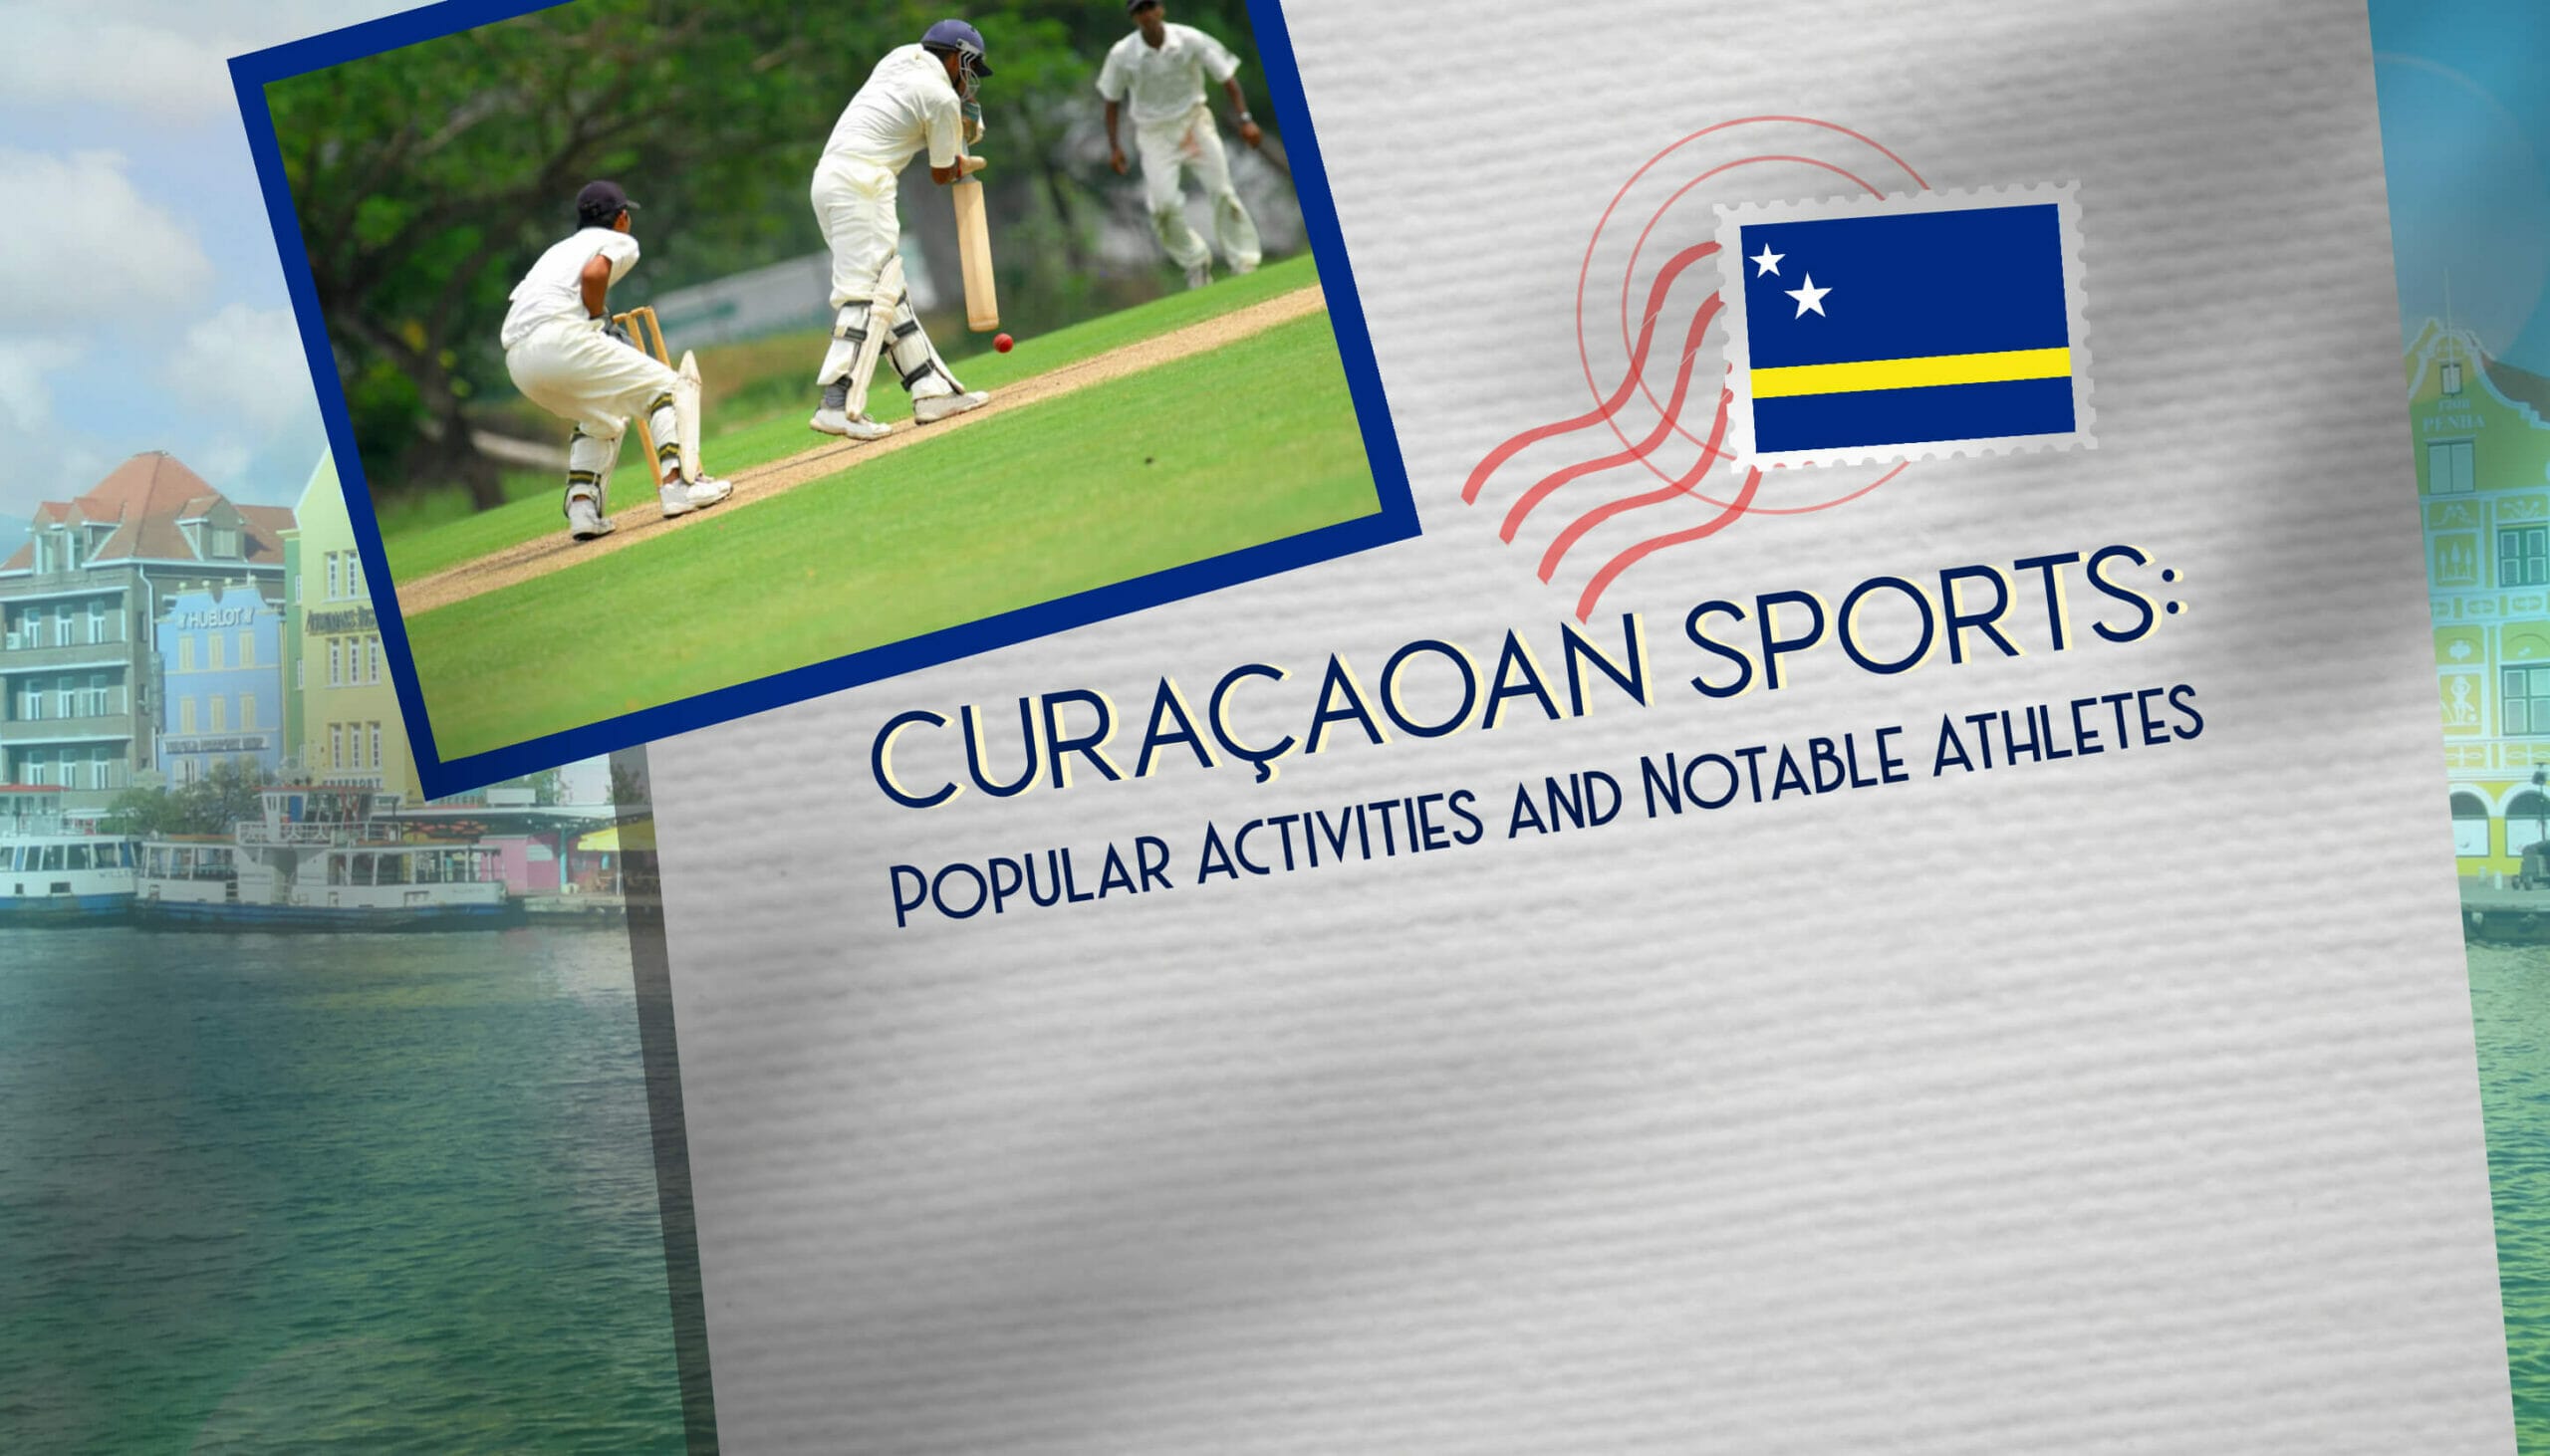 Curaçaoan Sports Popular Activities and Notable Athletes